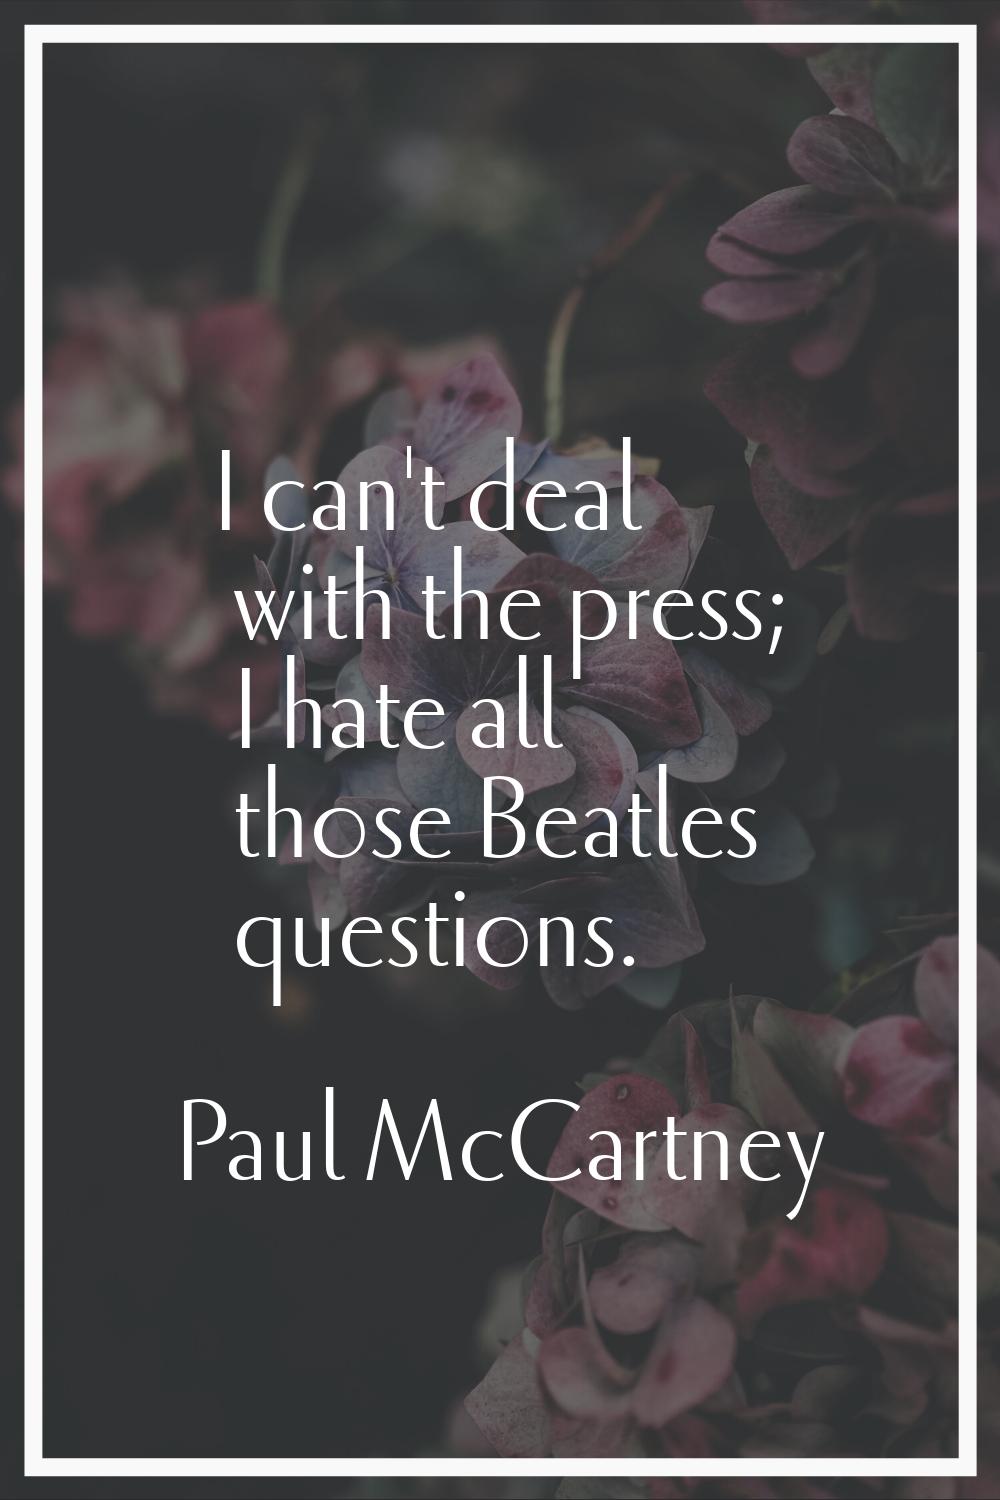 I can't deal with the press; I hate all those Beatles questions.